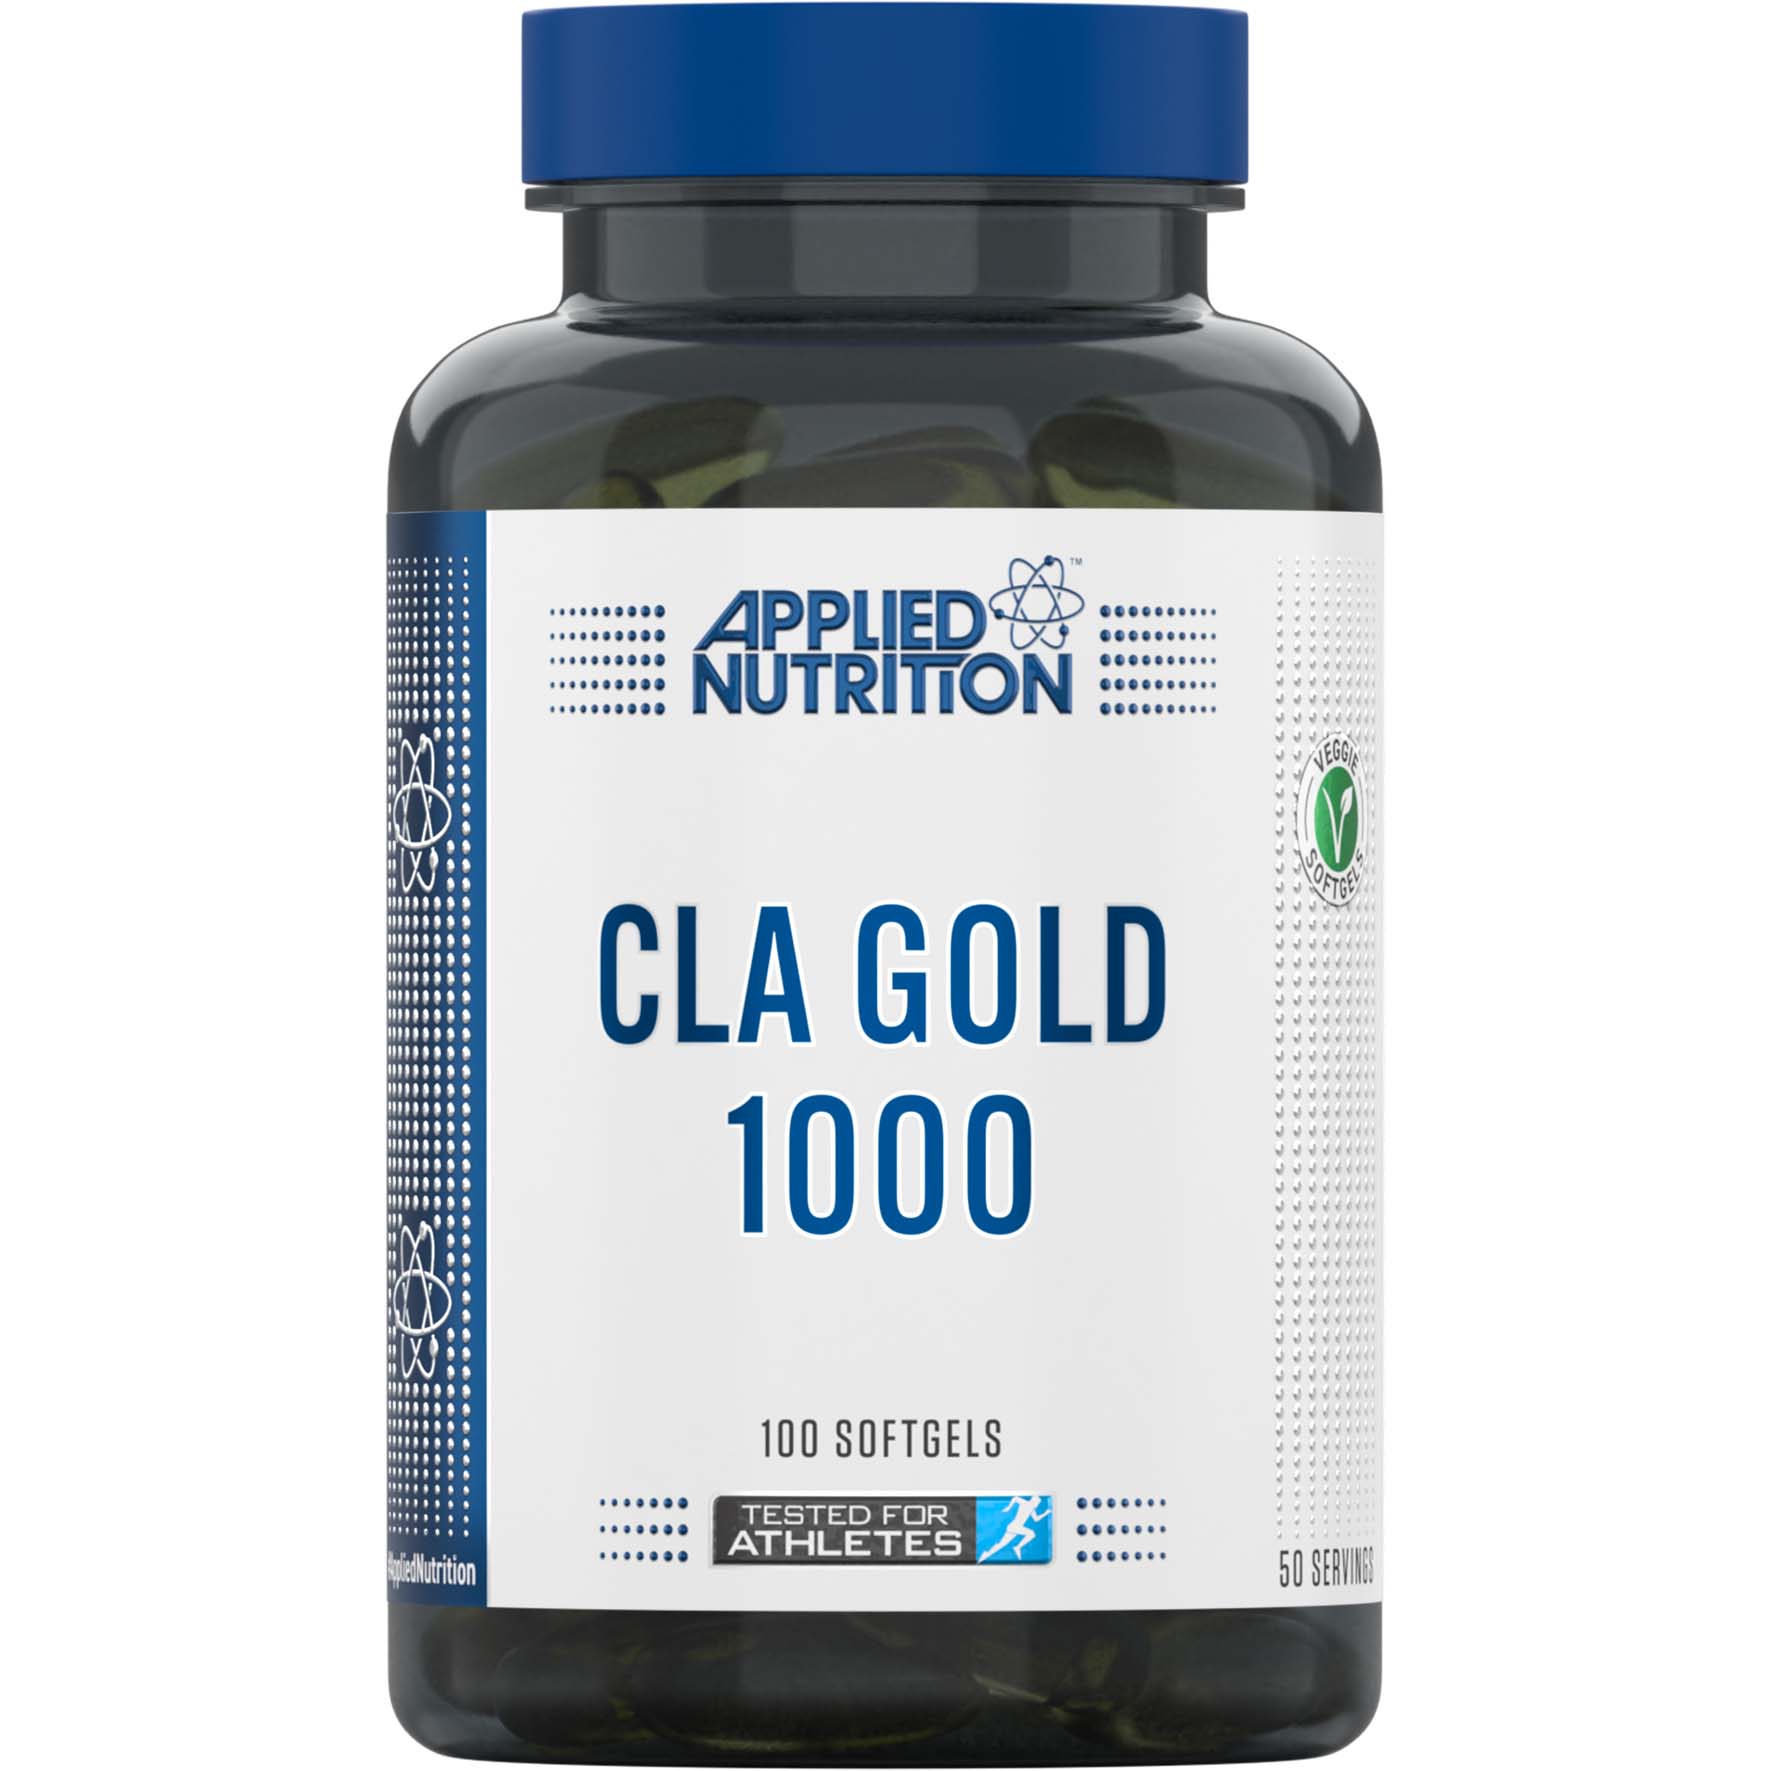 Applied Nutrition CLA Gold, 1000 mg, 100 Softgels